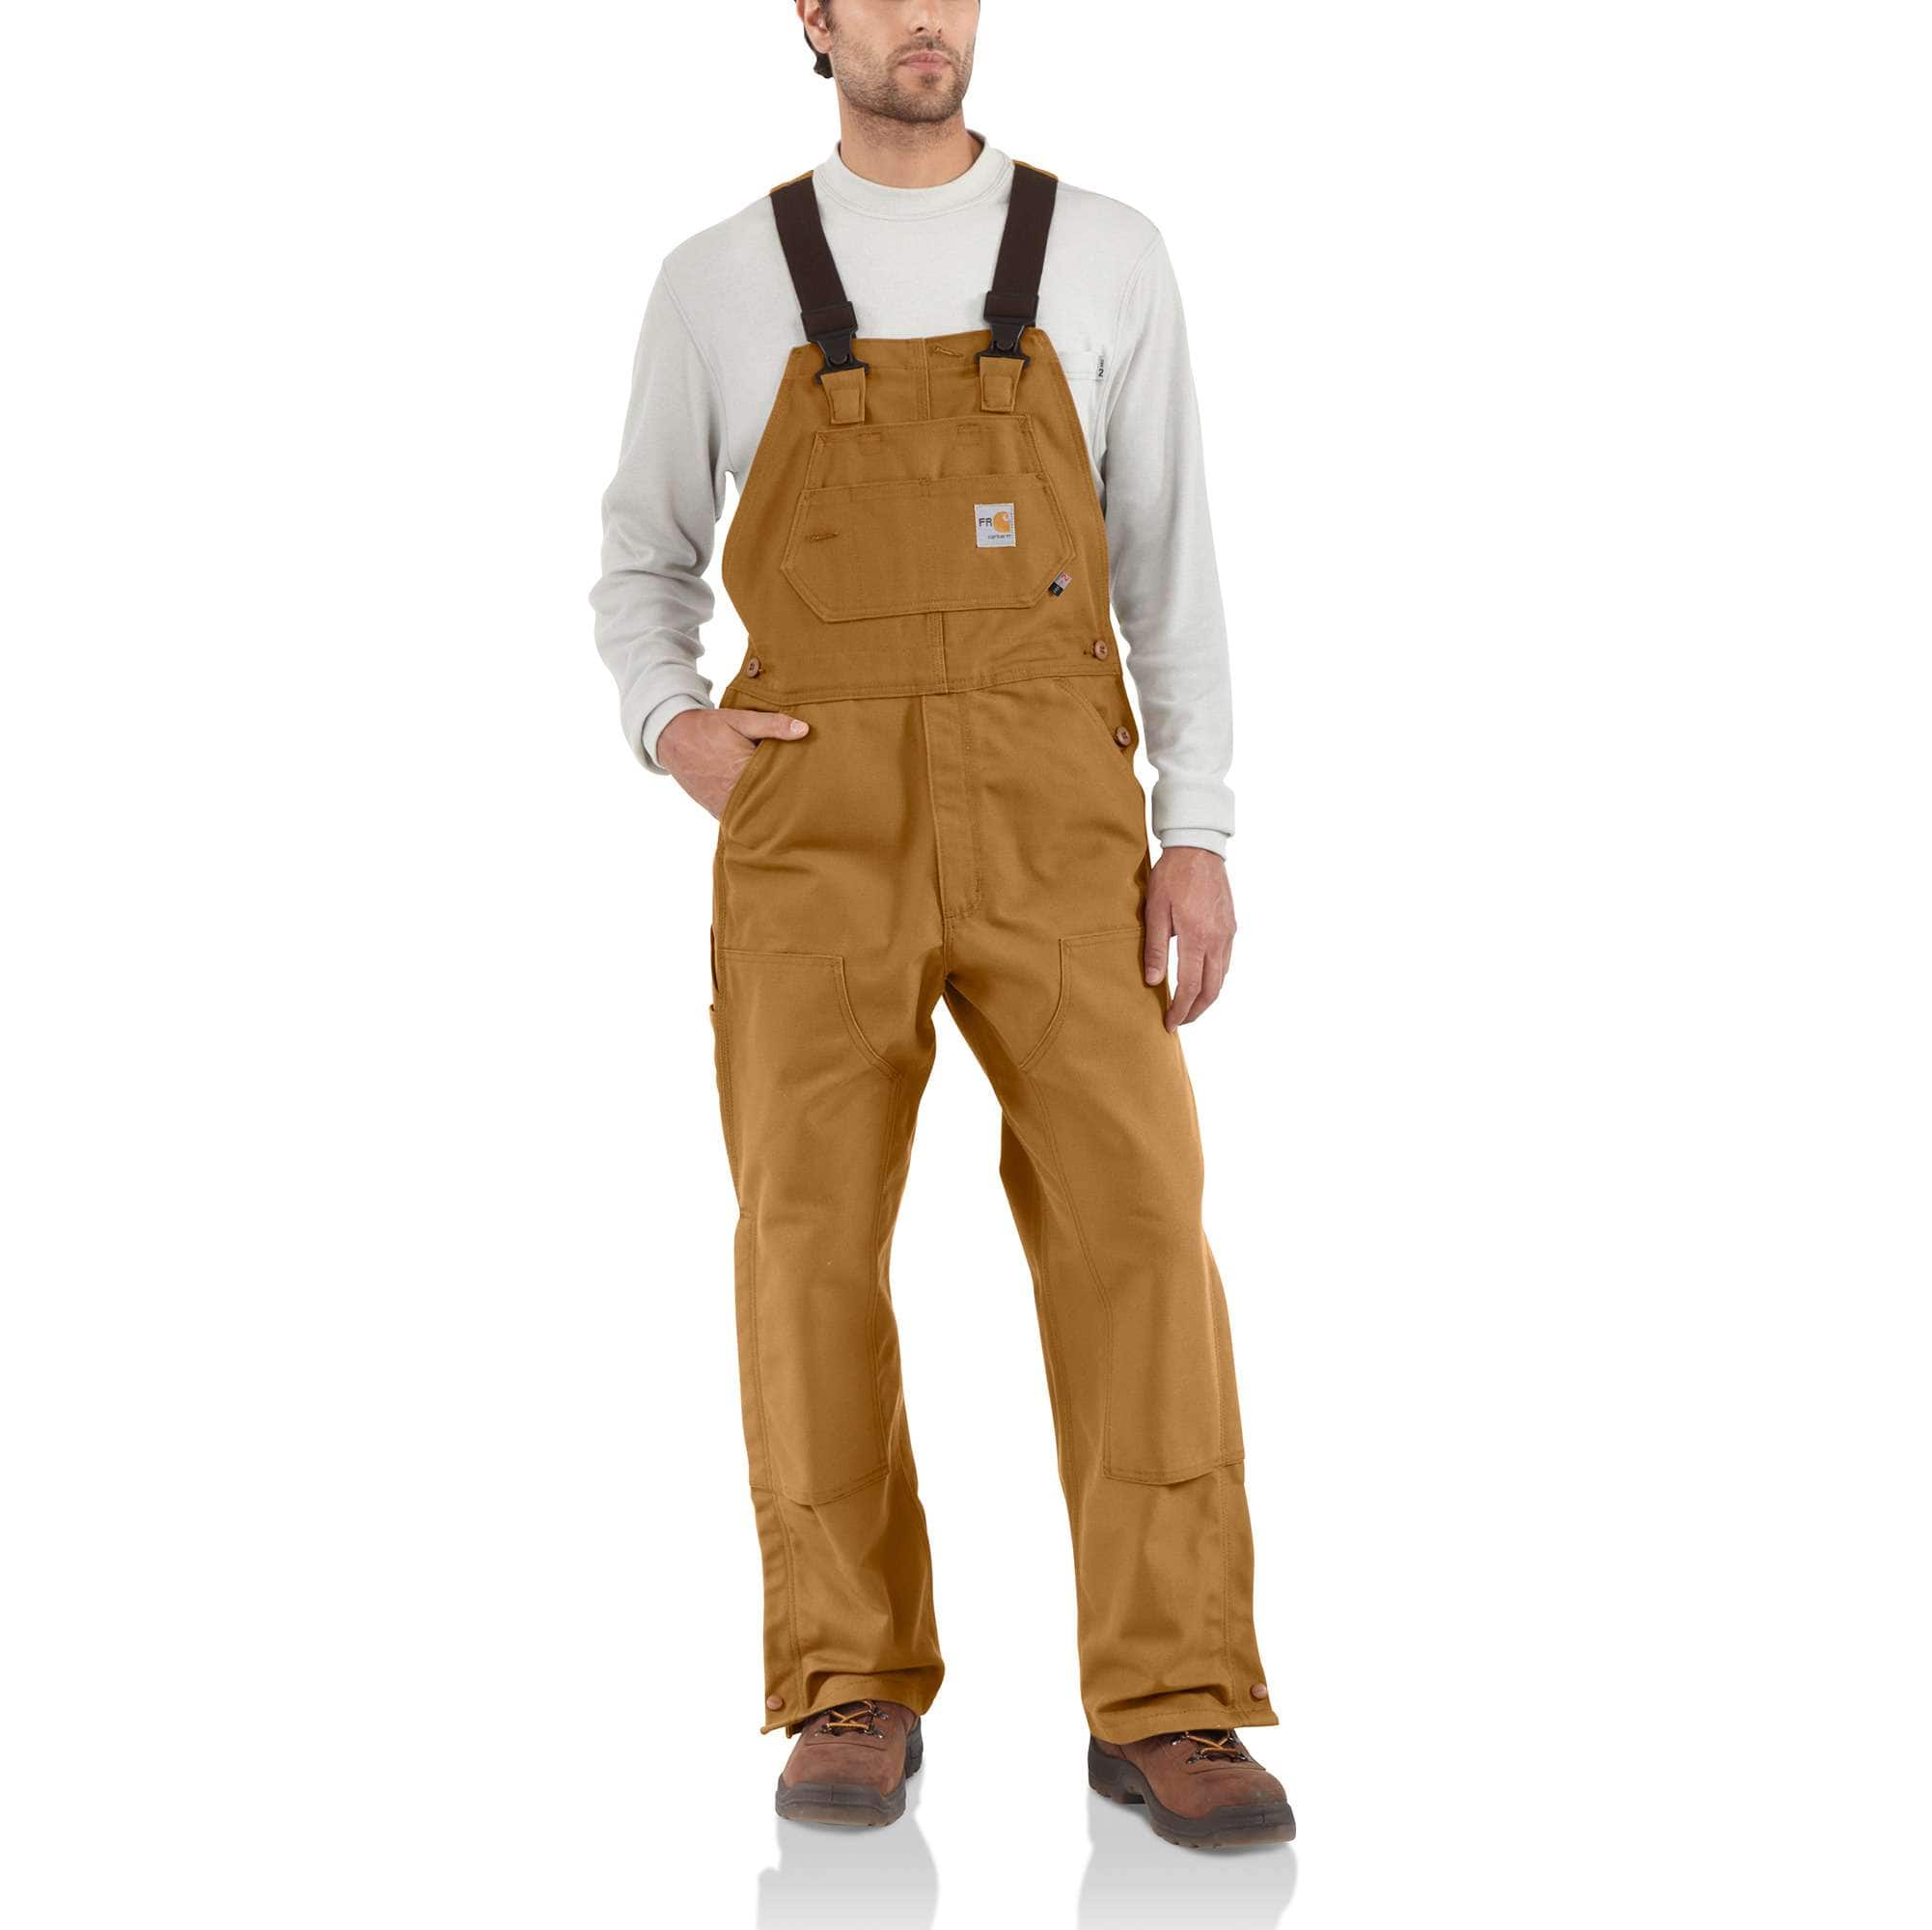 What is Fire Resistant Clothing? - iWantWorkwear